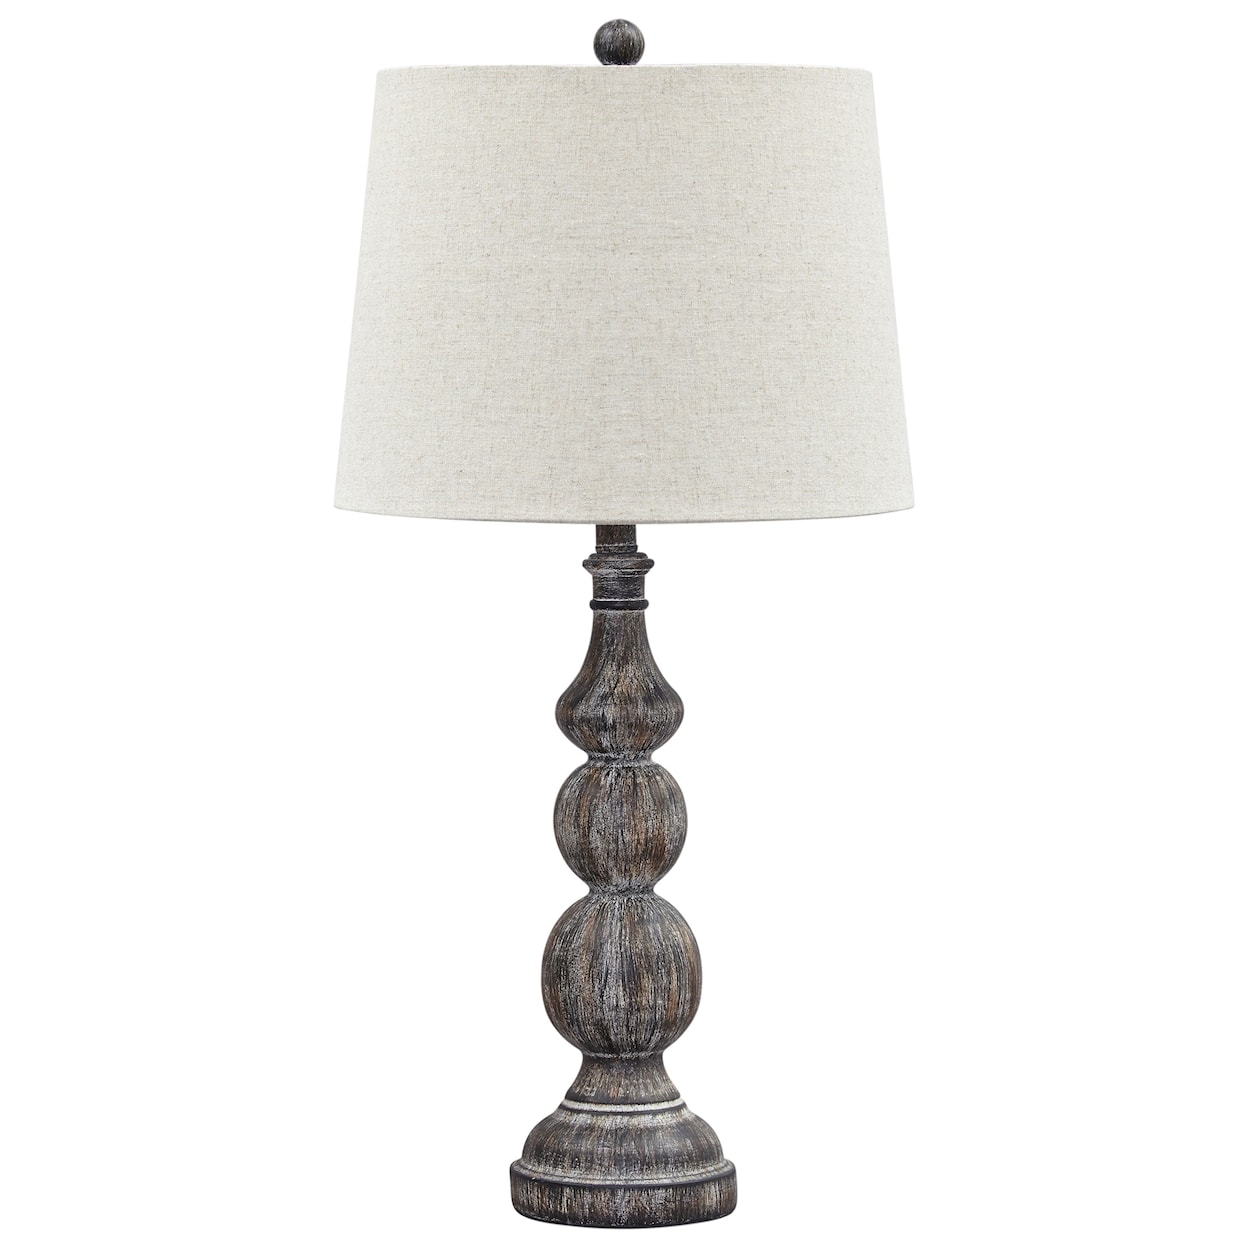 Ashley Furniture Signature Design Lamps - Traditional Classics Set of 2 Mair Antique Black Poly Table Lamps